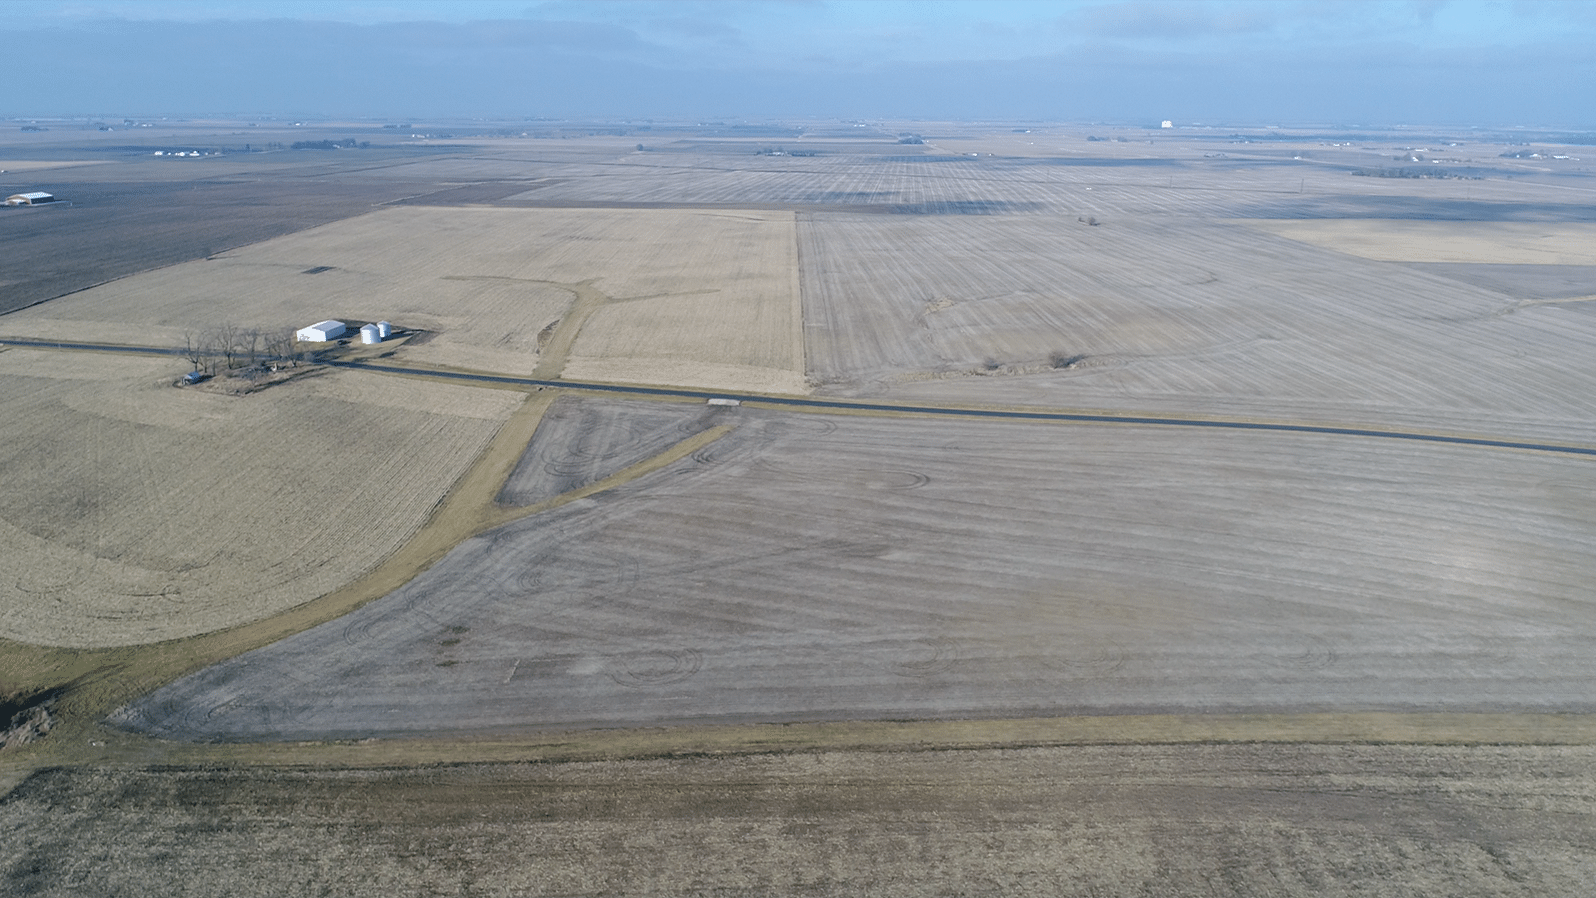 Champaign Co Auction 208 Ac - Feb 18 2020 - Looking North